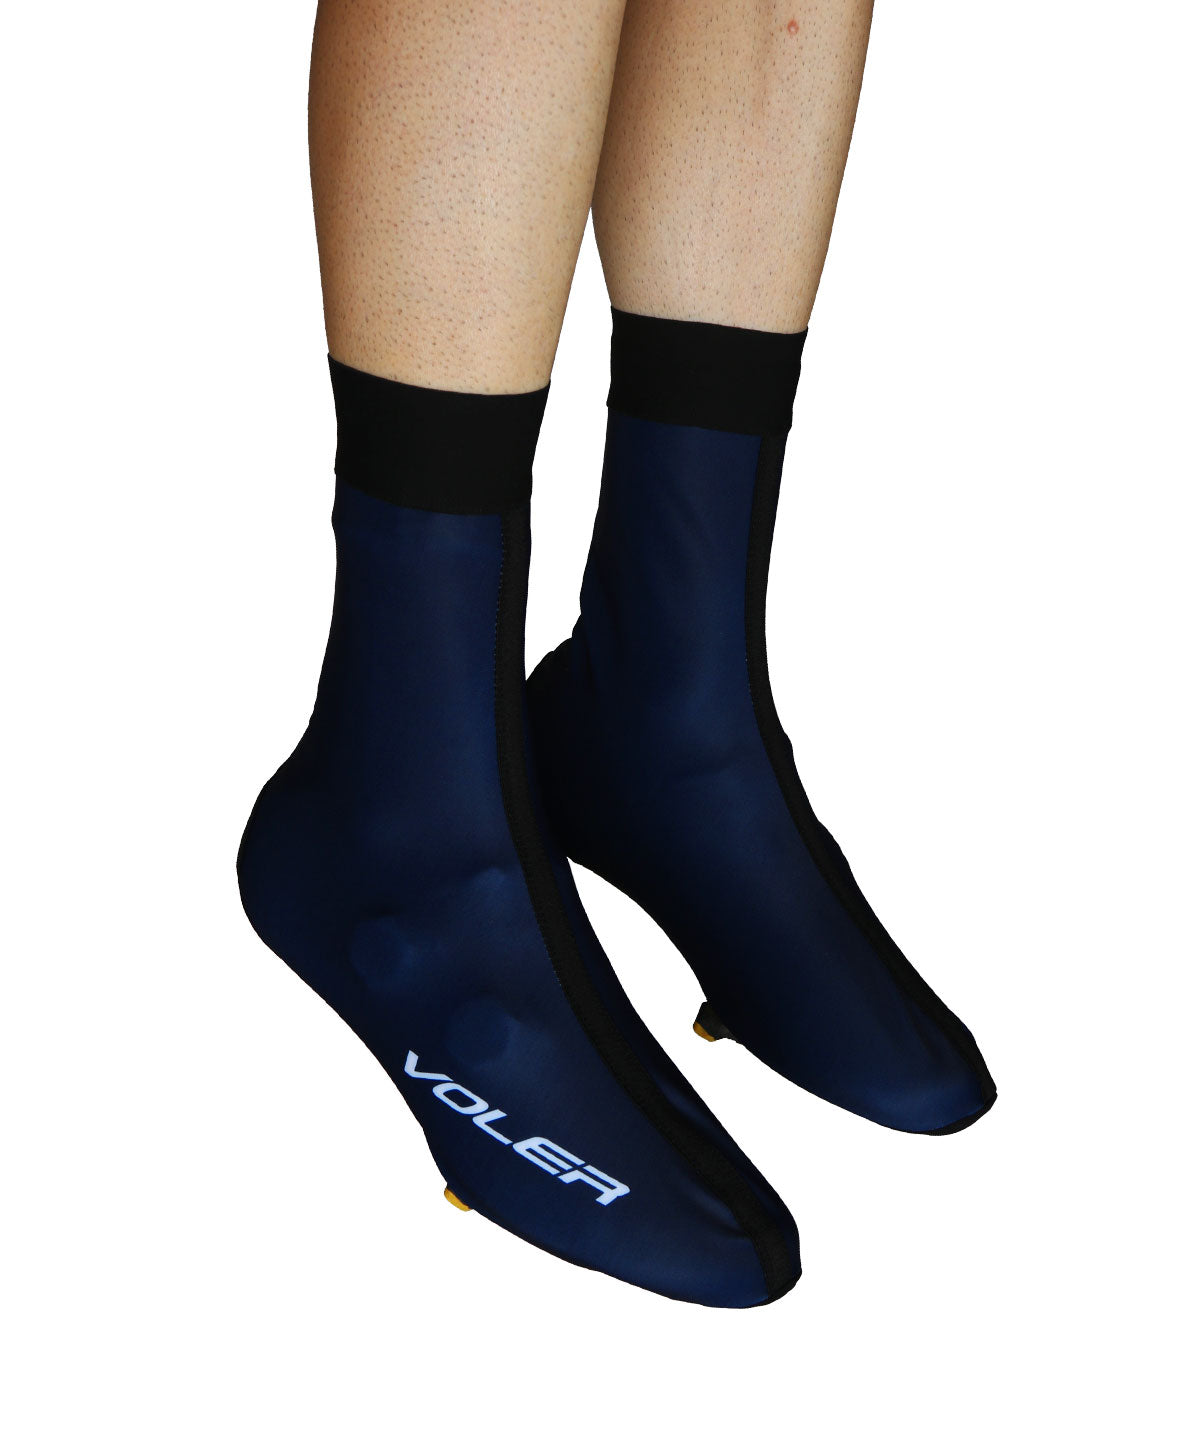 THERMAL SHOE COVERS 6''